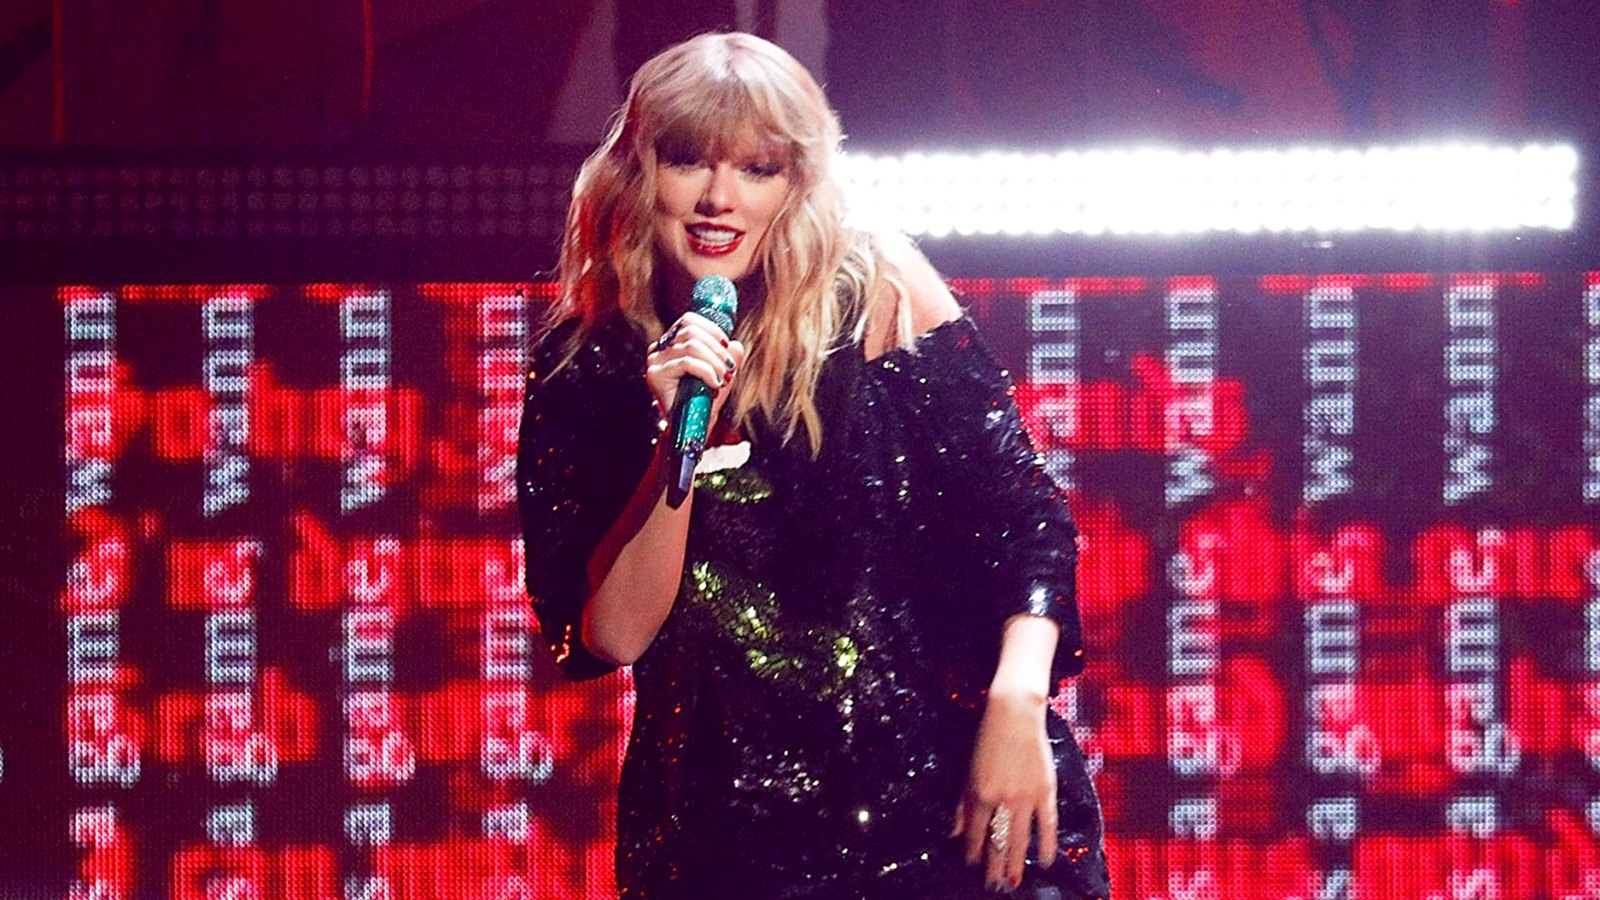 Taylor Swift performs during the 2017 Z100 Jingle Ball at Madison Square Garden in New York City.